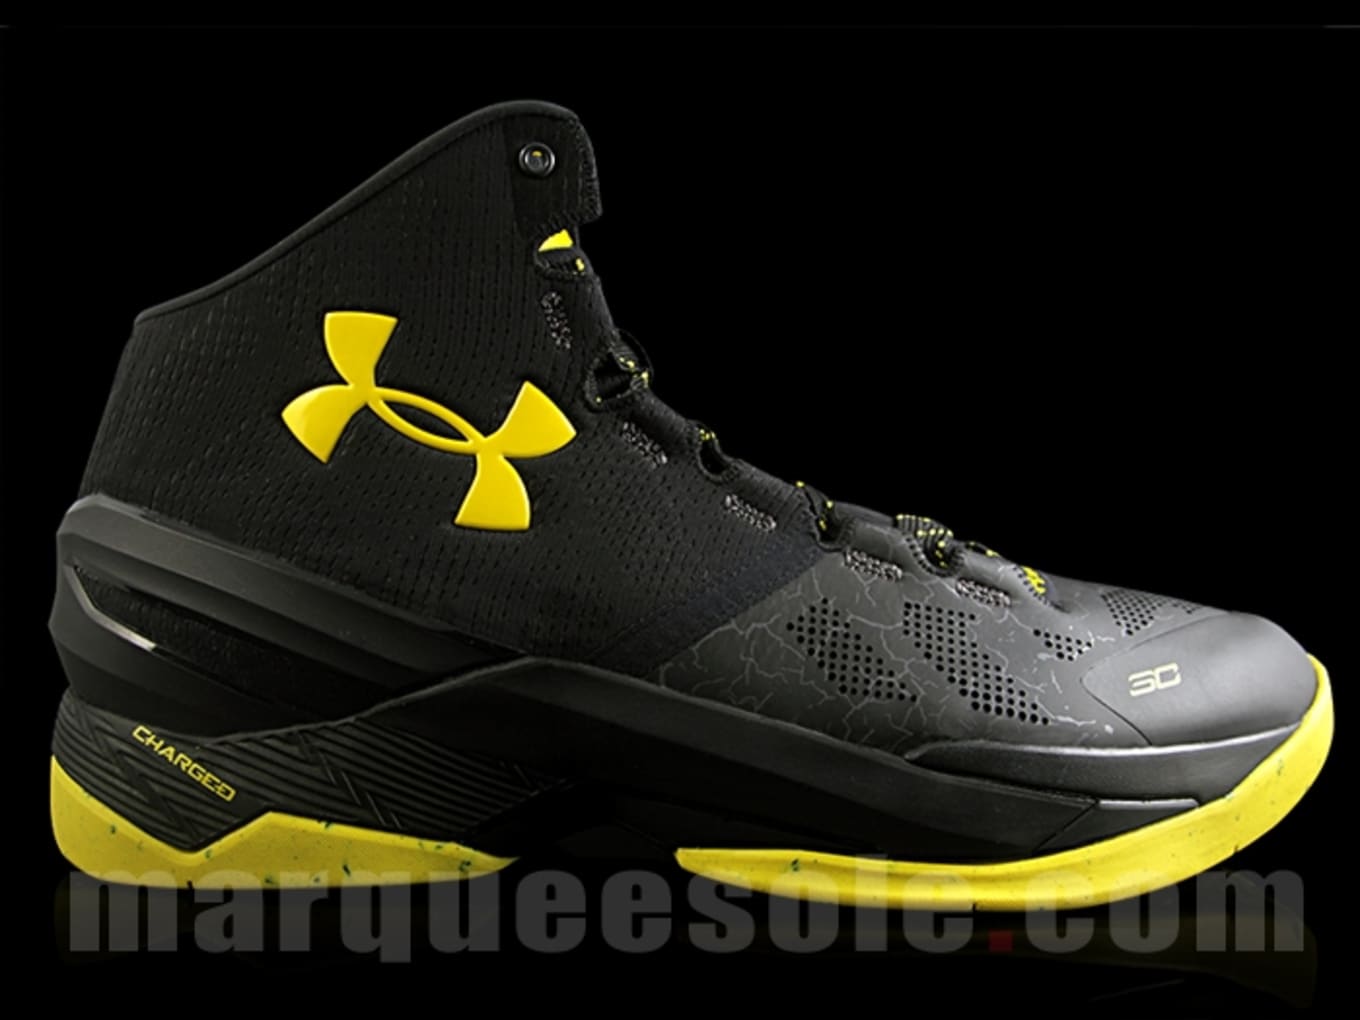 Batman Curry 2 | Sole Collector